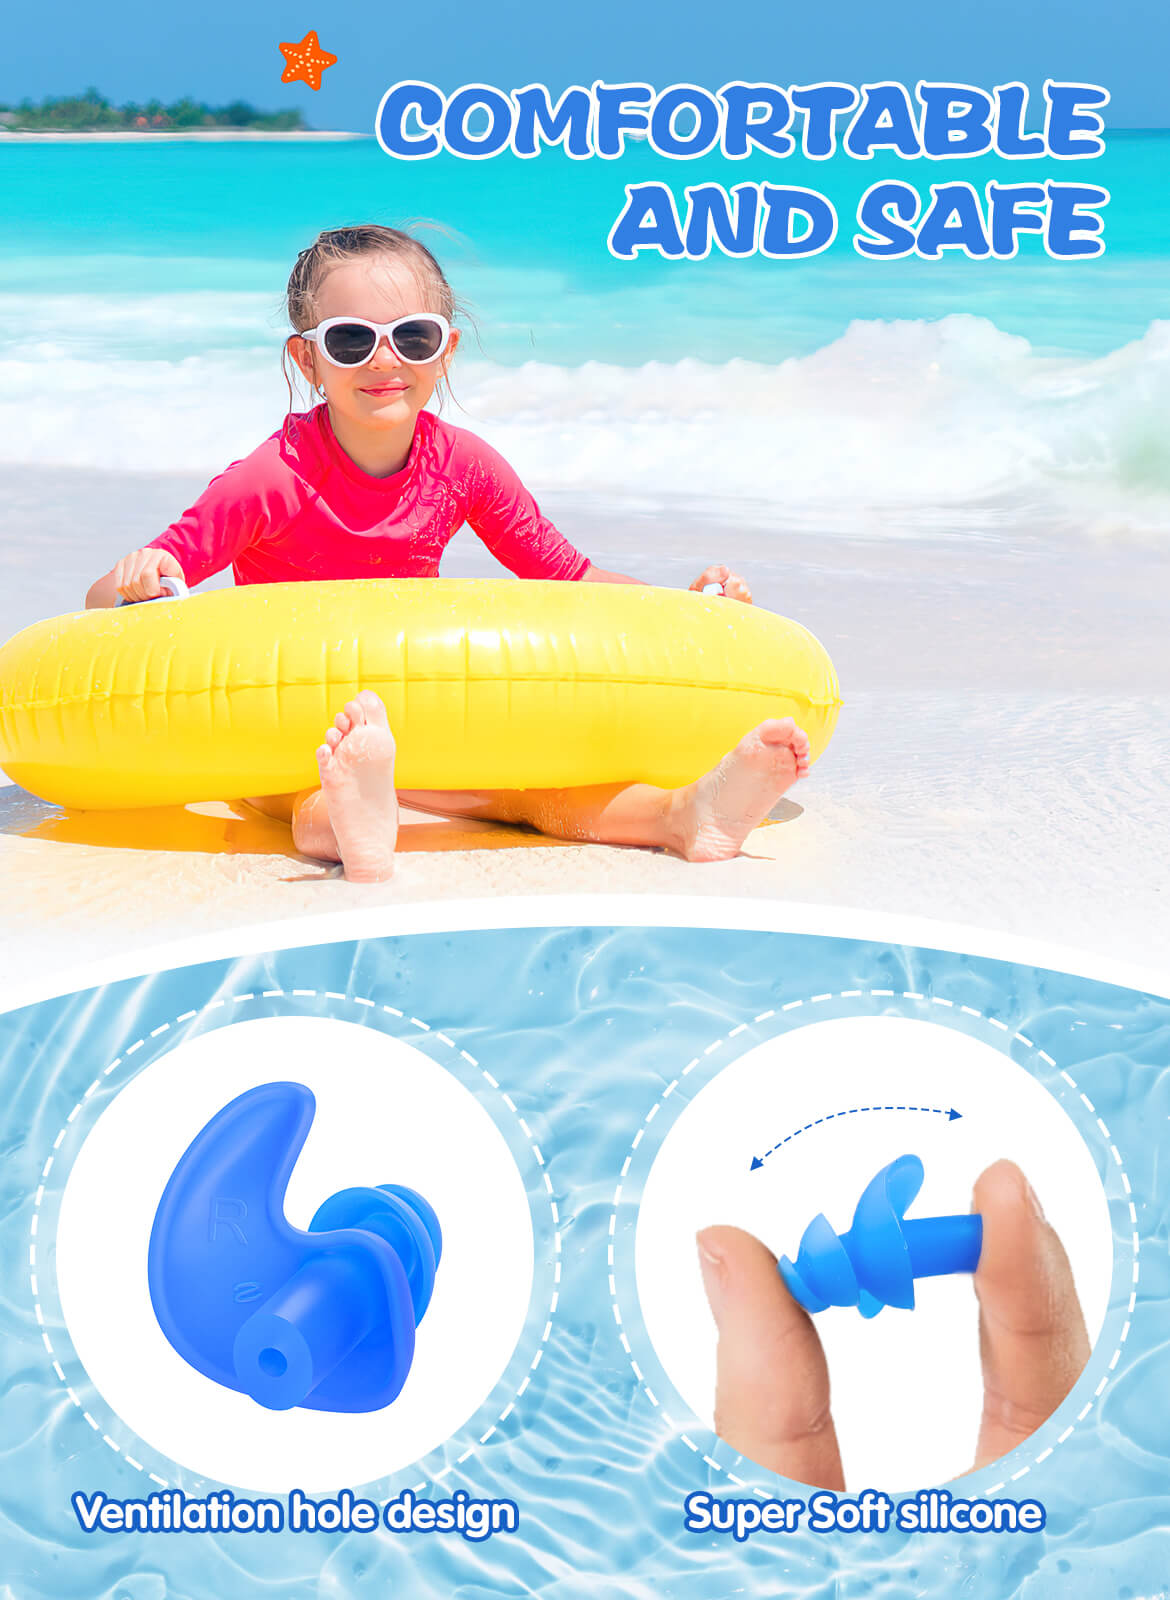 Hearprotek 3 Pairs Soft Silicone Swimming Ear Plugs for Kids